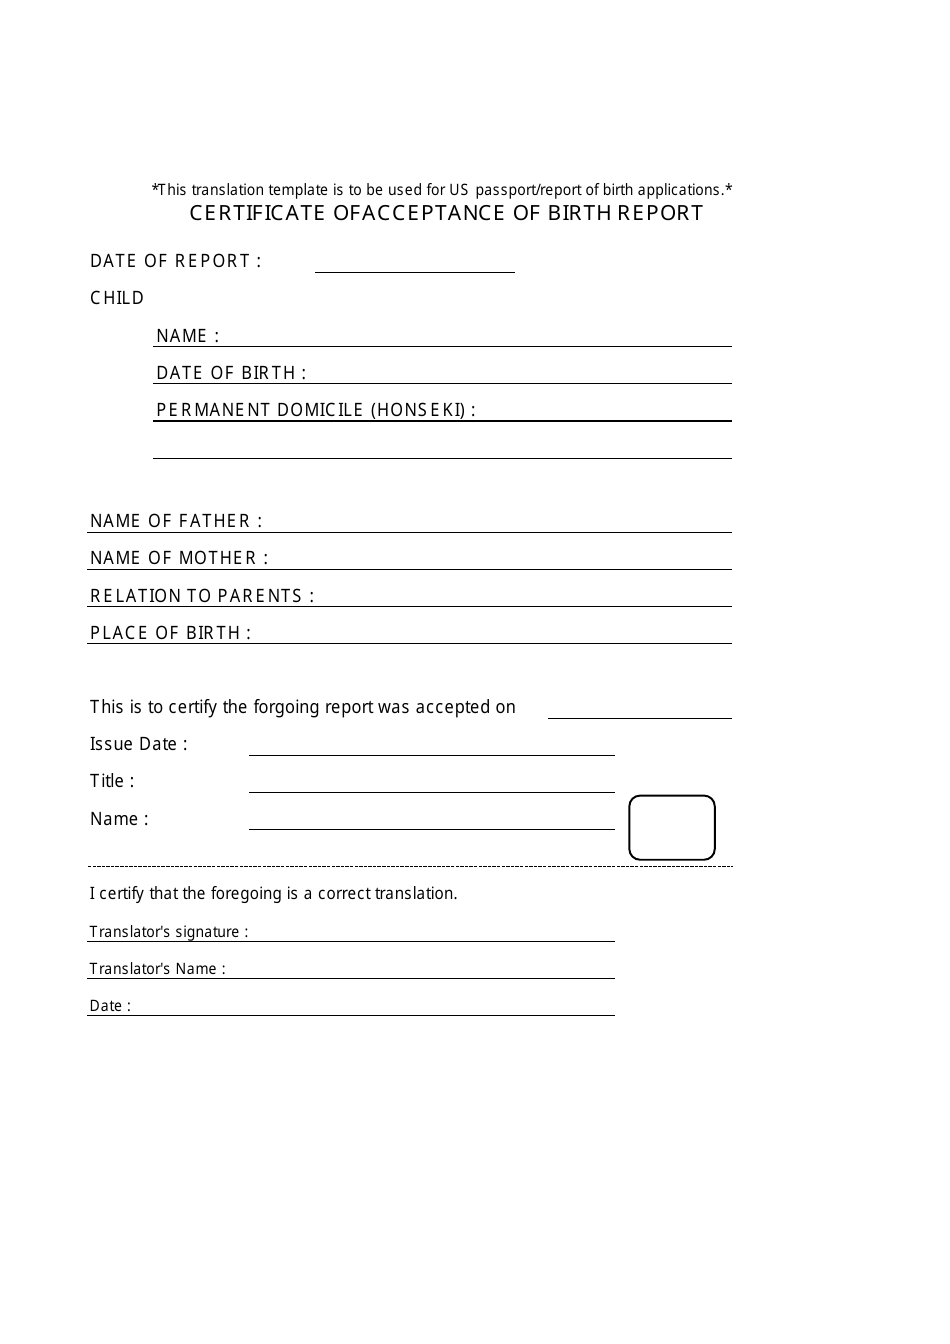 Certificate of Acceptance of Birth Report Download Printable PDF Inside Birth Certificate Translation Template